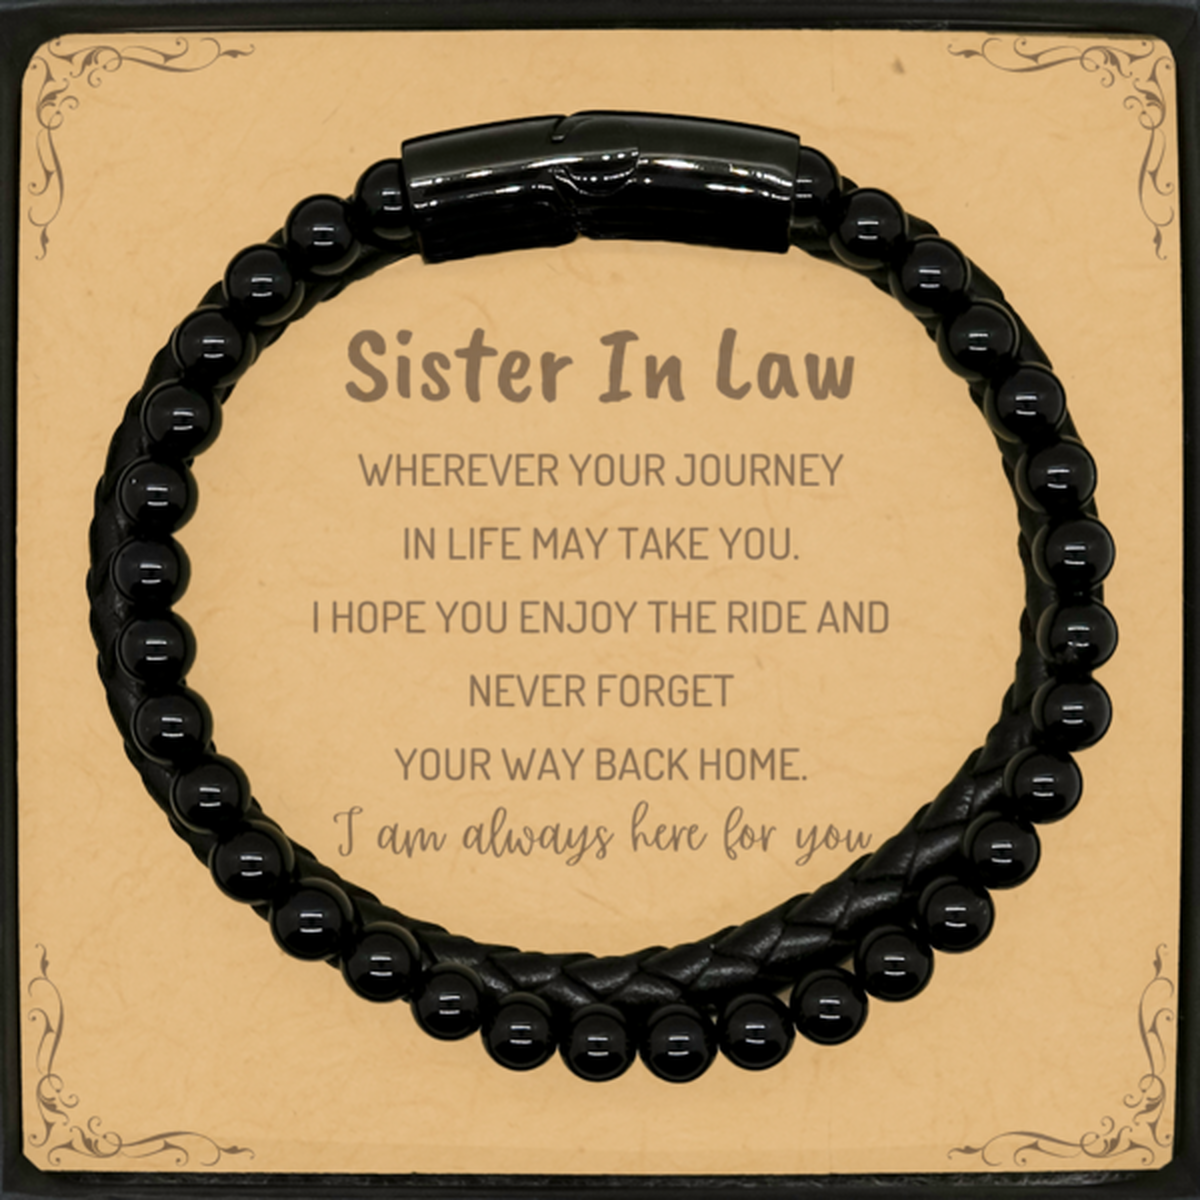 Sister In Law wherever your journey in life may take you, I am always here for you Sister In Law Stone Leather Bracelets, Awesome Christmas Gifts For Sister In Law Message Card, Sister In Law Birthday Gifts for Men Women Family Loved One